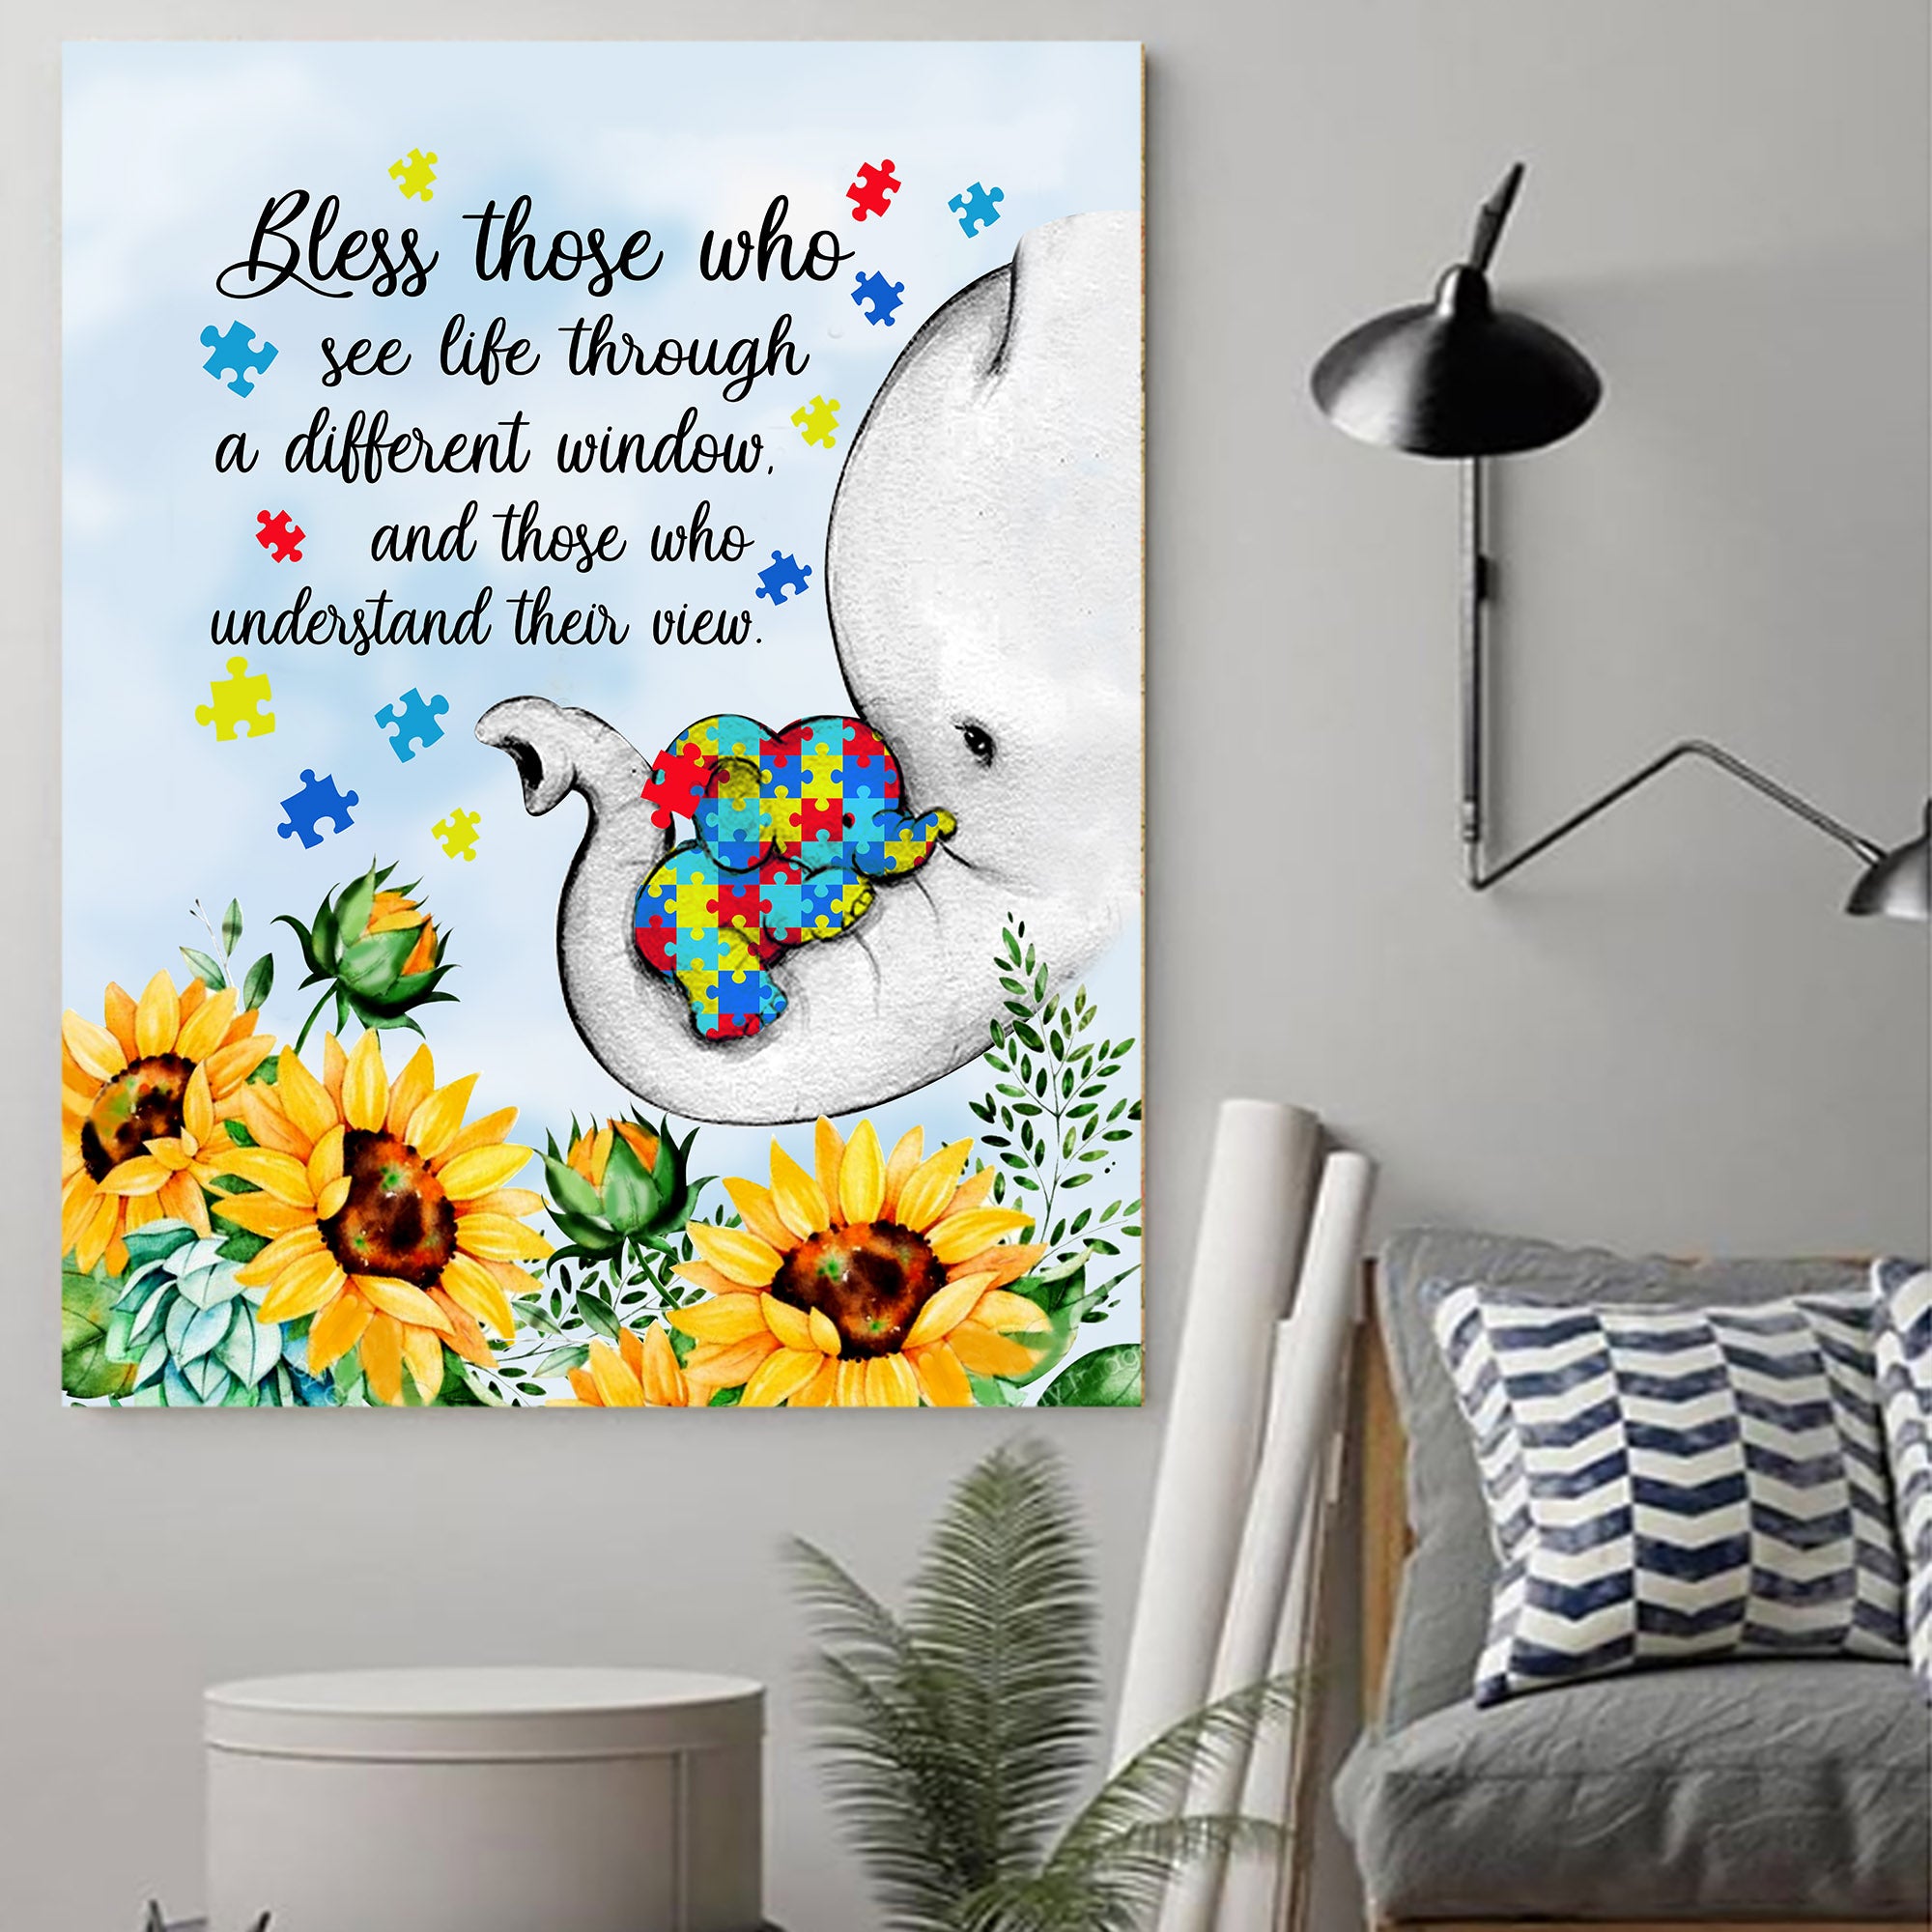 Autism Canvas – Bless Those Who Understand Their View, Wall Art Home Decor